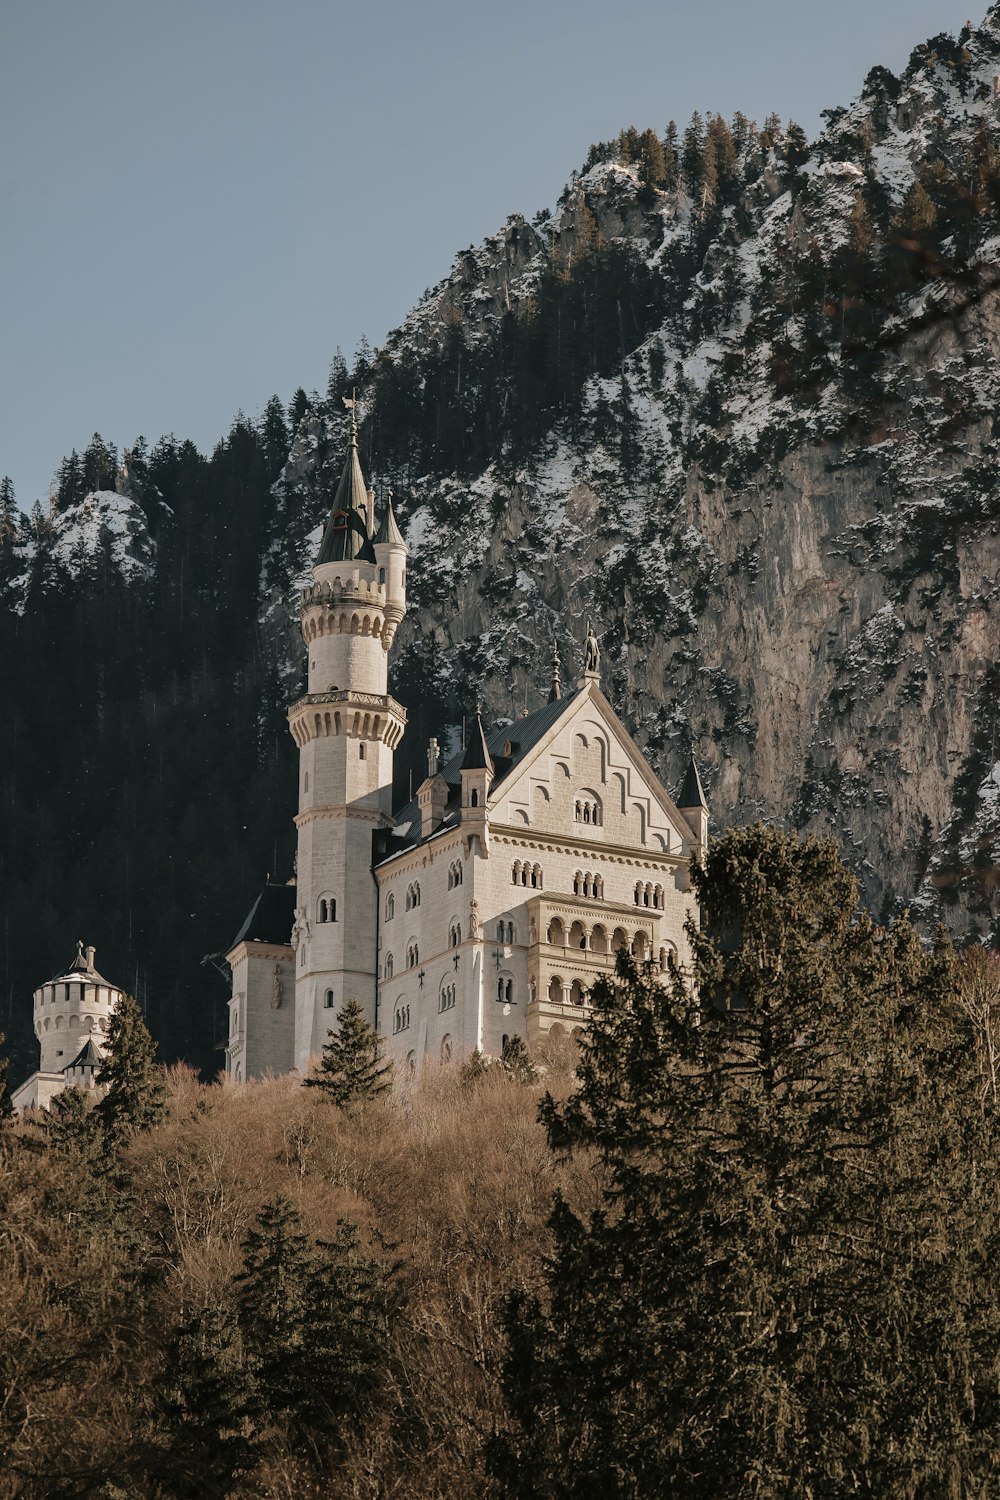 a large white castle sitting in the middle of a forest